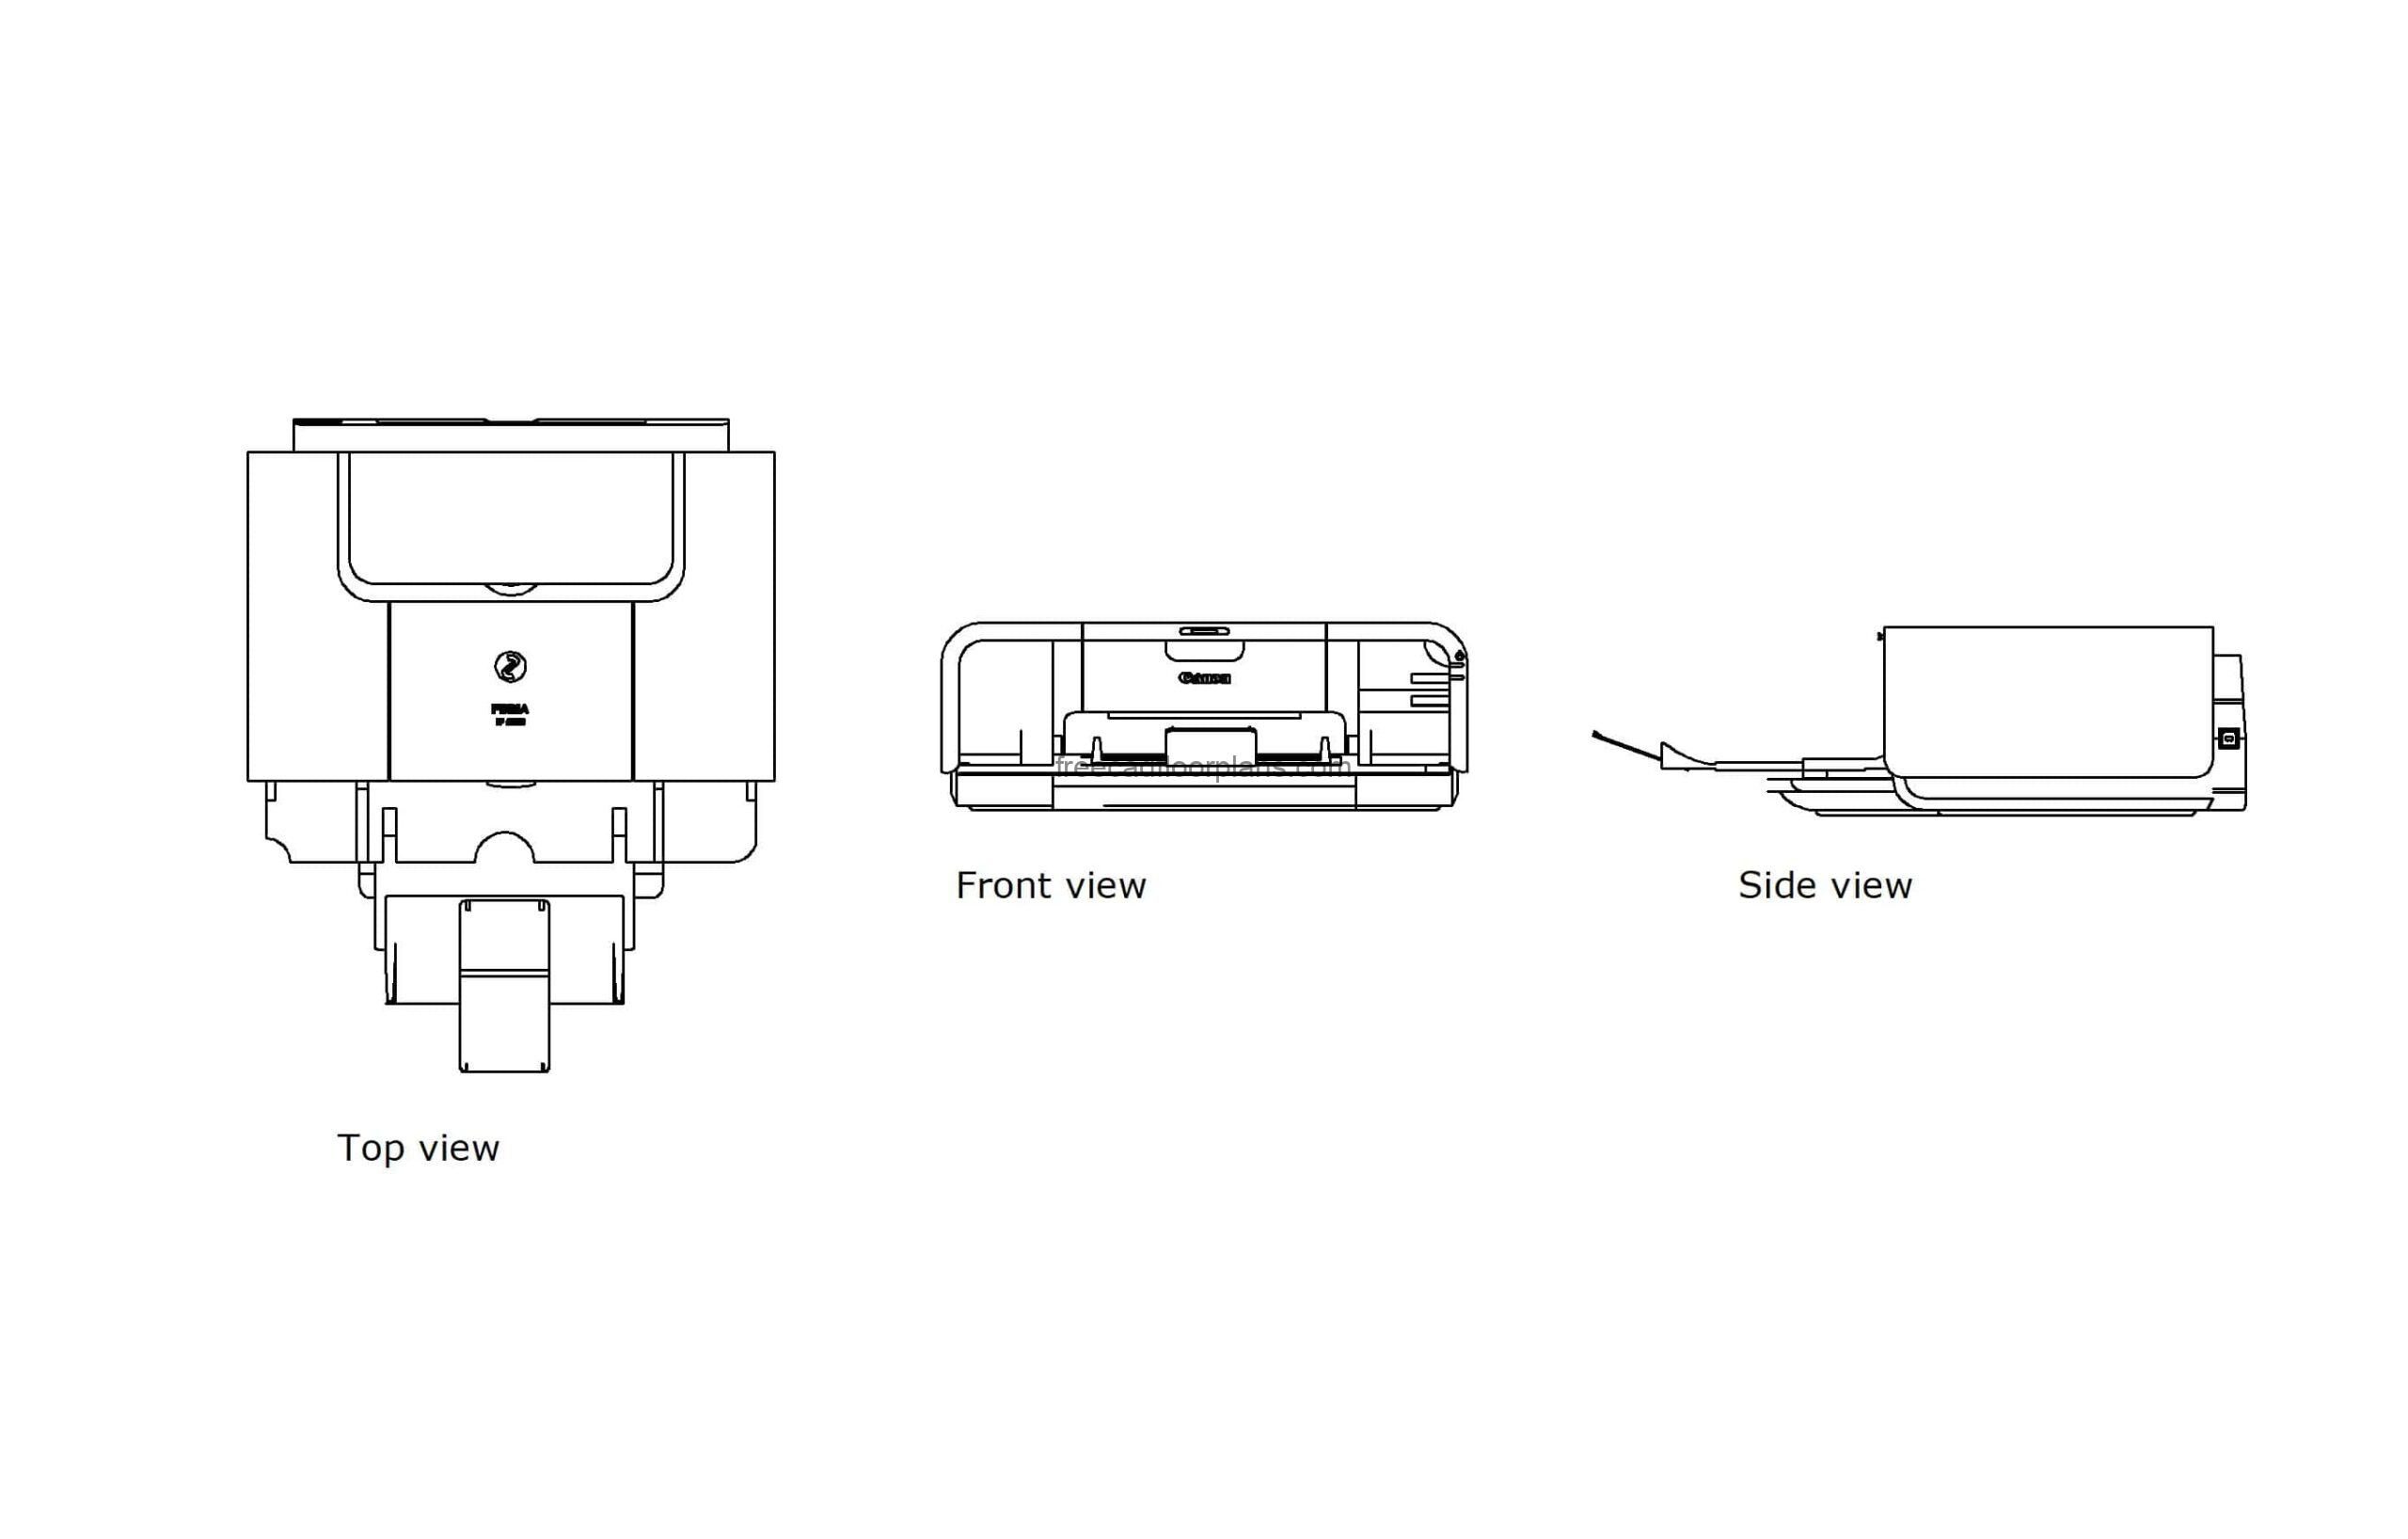 autocad drawing of a canon printer, 2d views, dwg file plan and elevation view, for free download